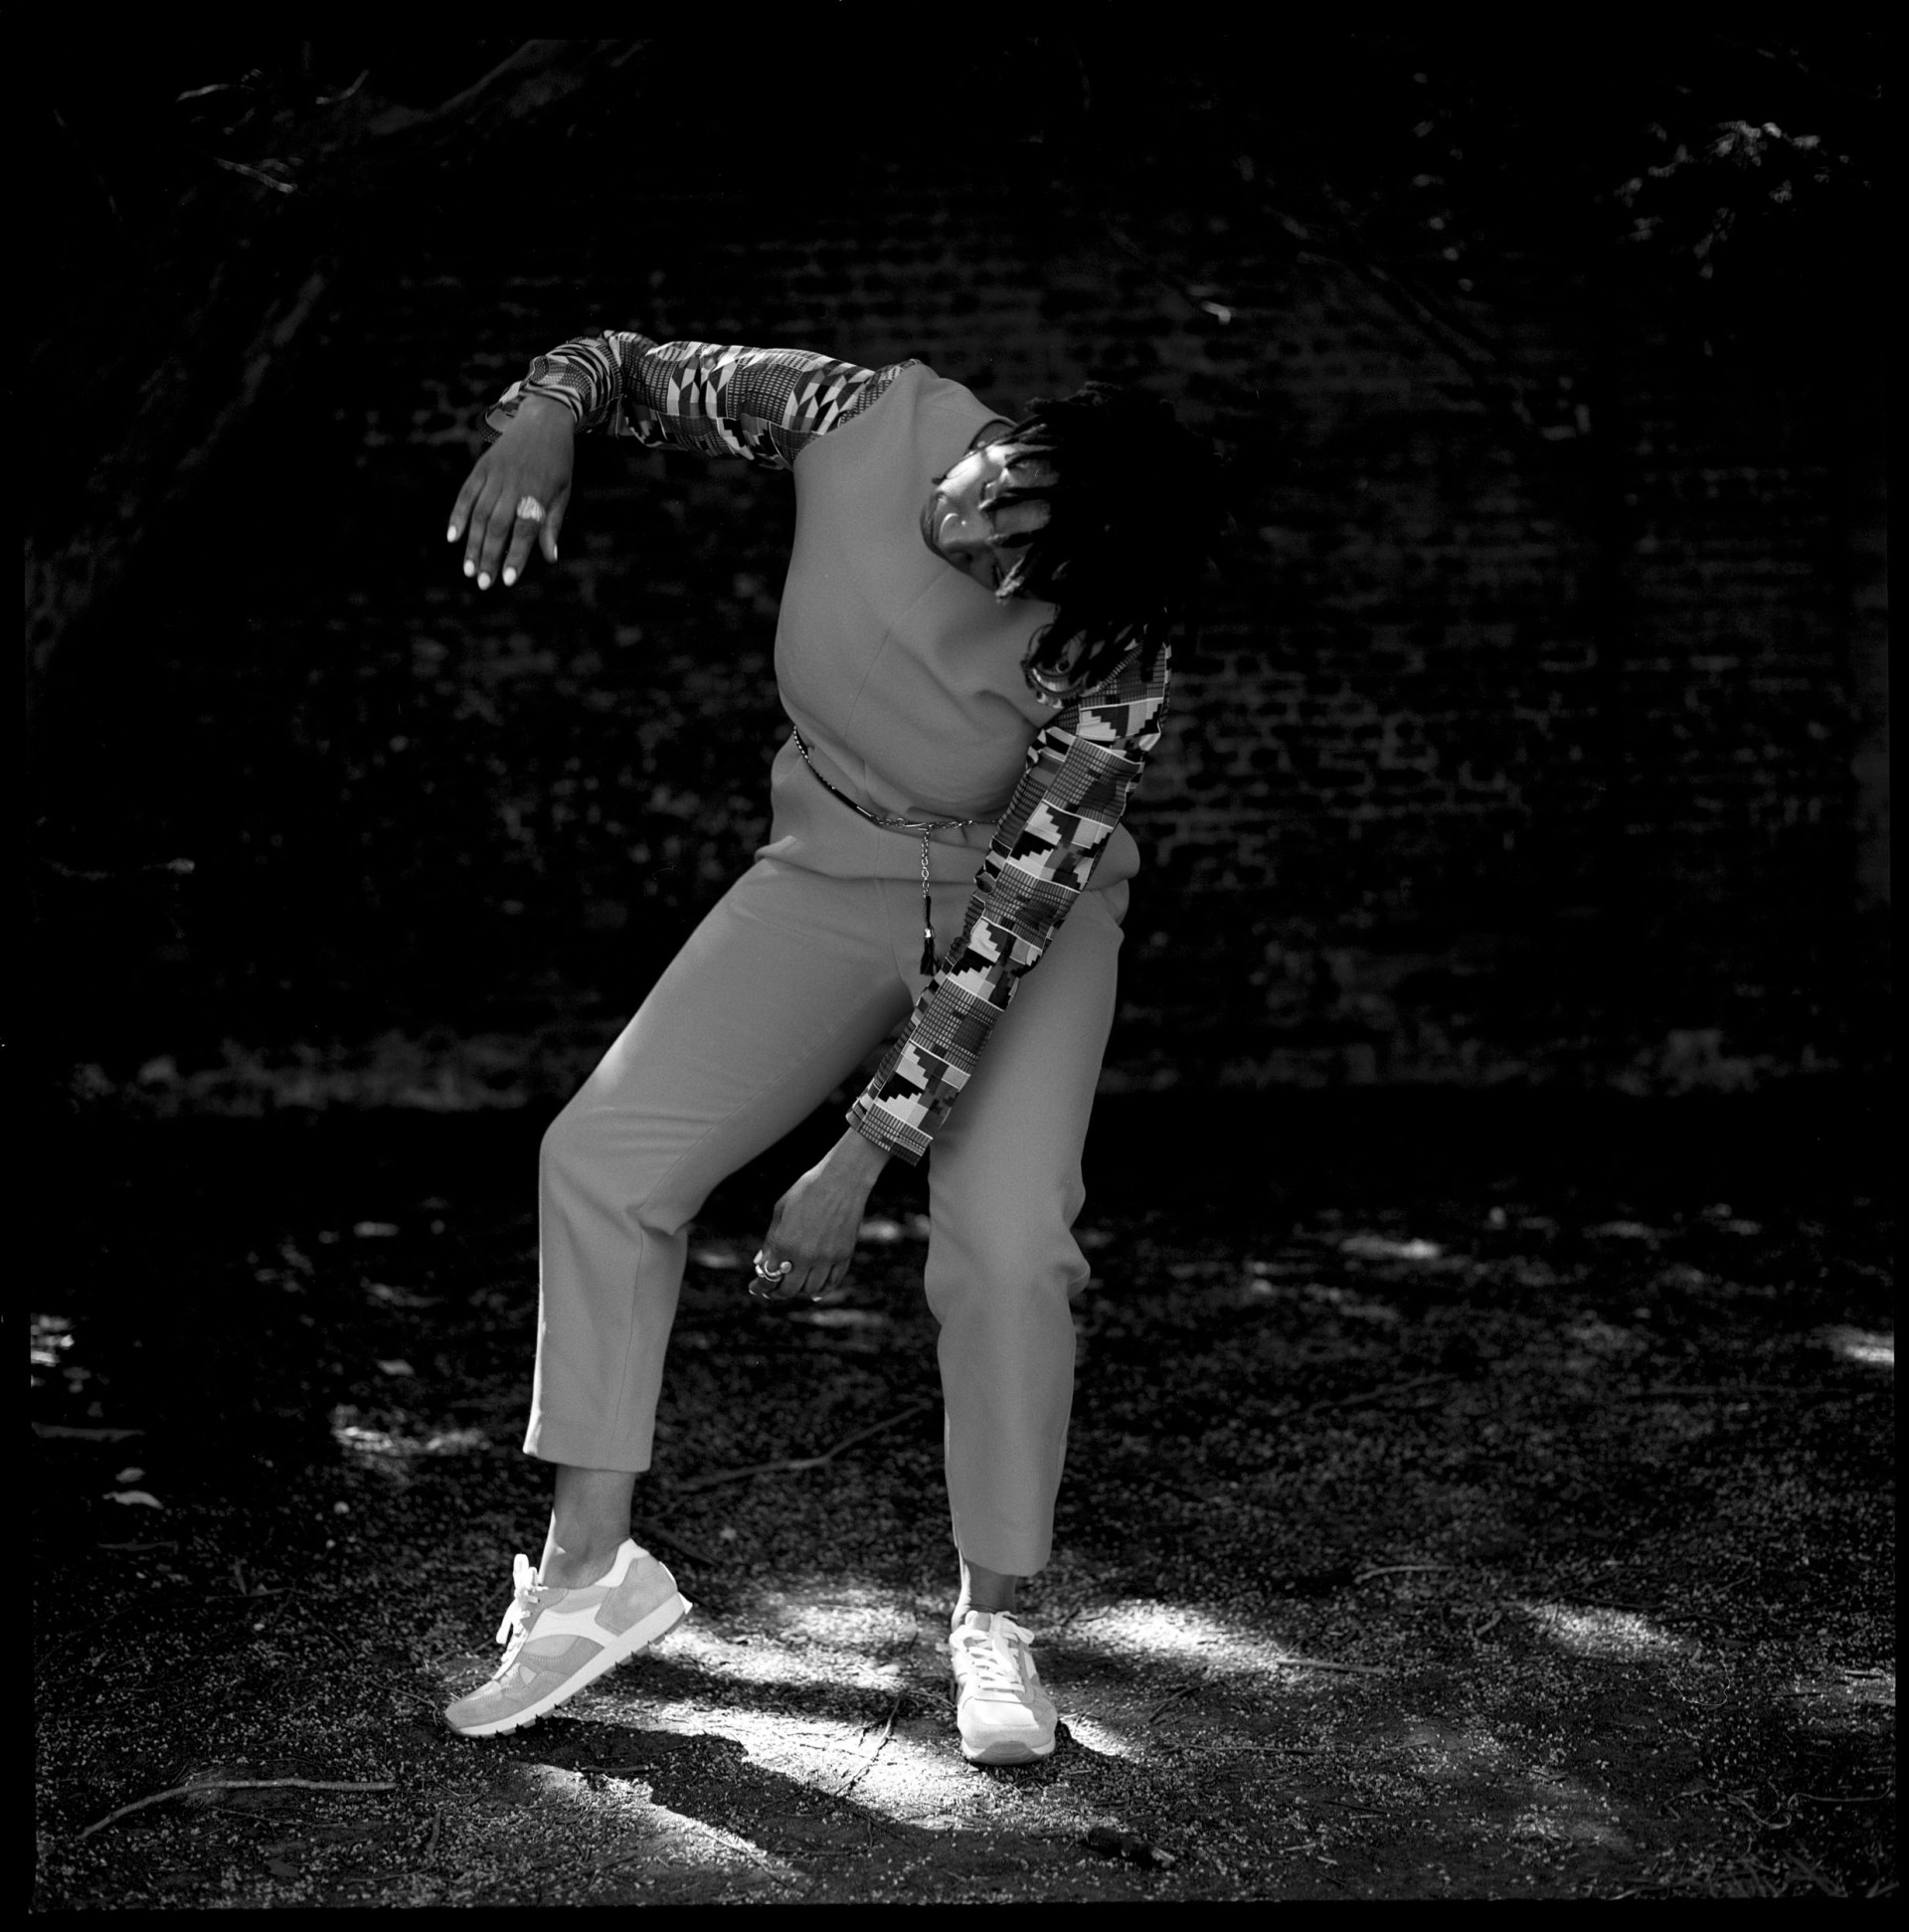 Black and white image of movement director Coral Messam. In it, she appears to be dancing, raising one arm up at a 90 degree angle and hanging her head. One foot is pointed out and she stands in front of a brick wall with vegetation surrounding her.